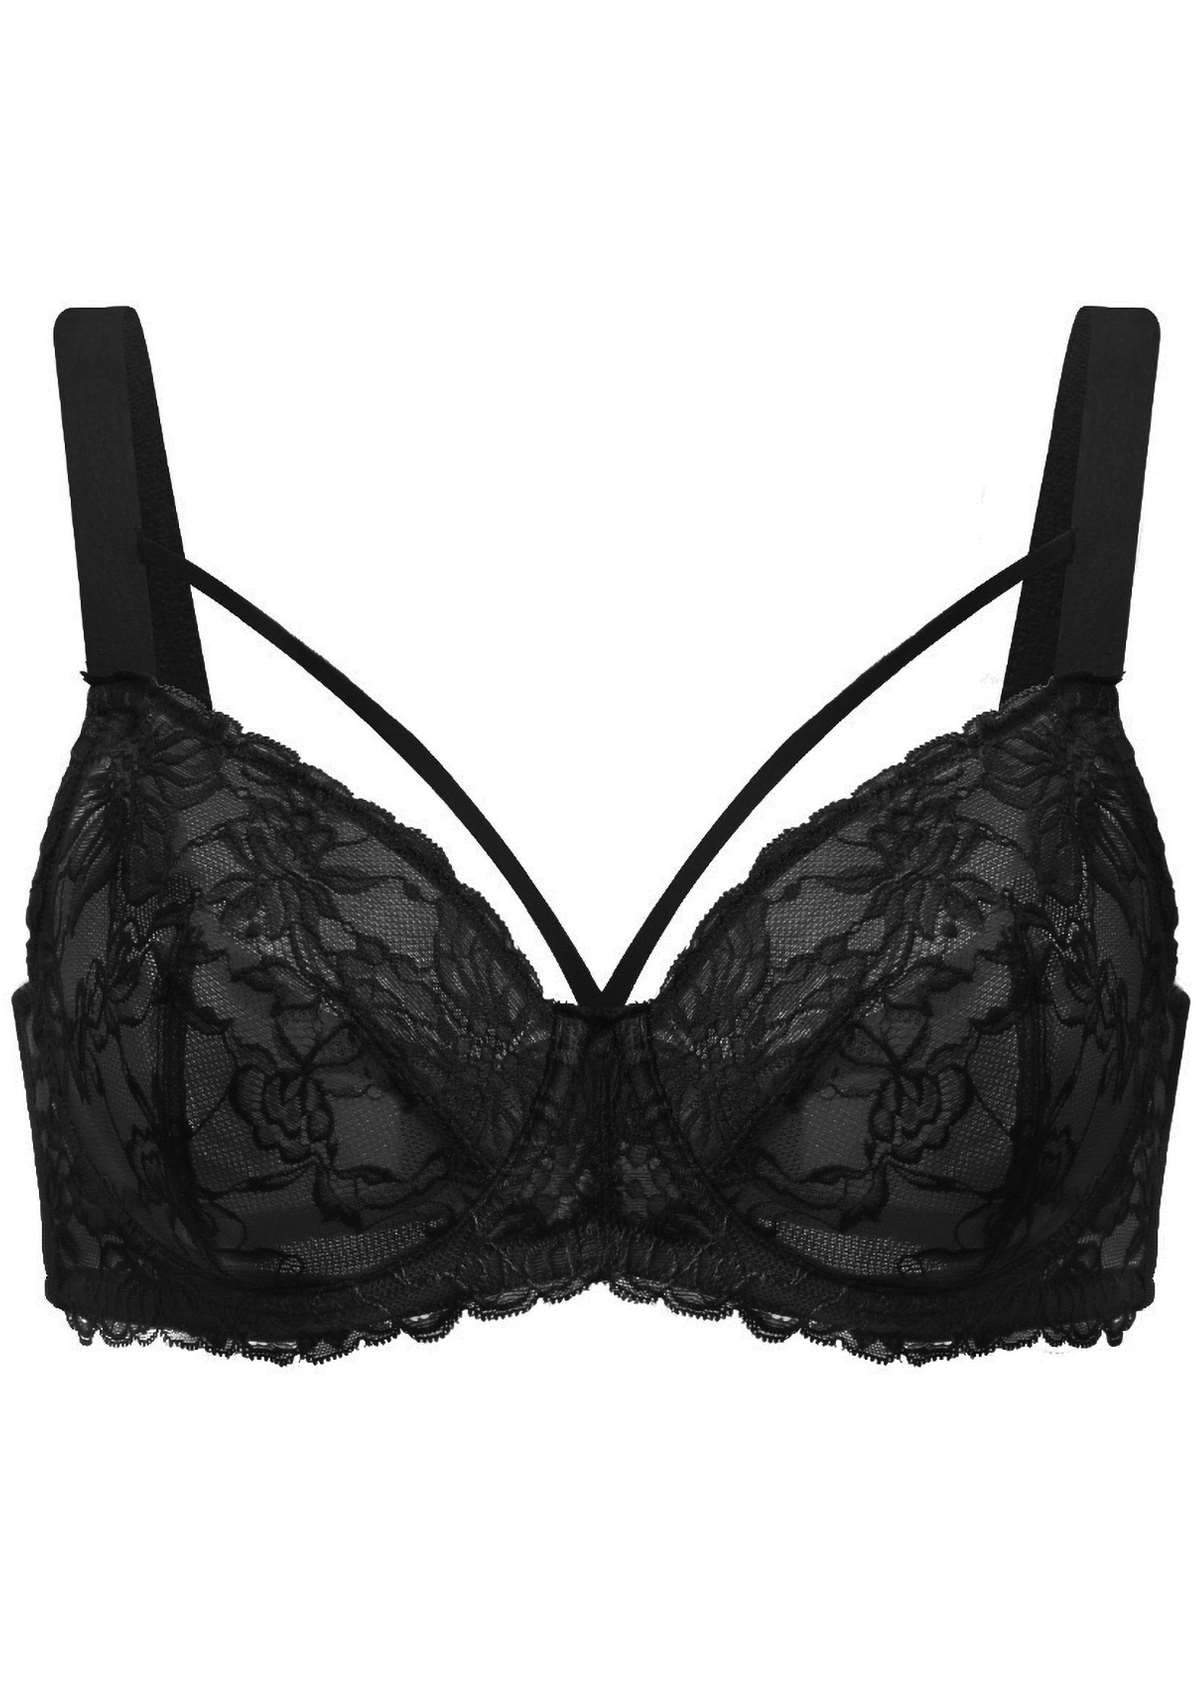 HSIA Pretty In Petals Bra - Plus Size Lingerie For Comfrot And Support - Black / 40 / G